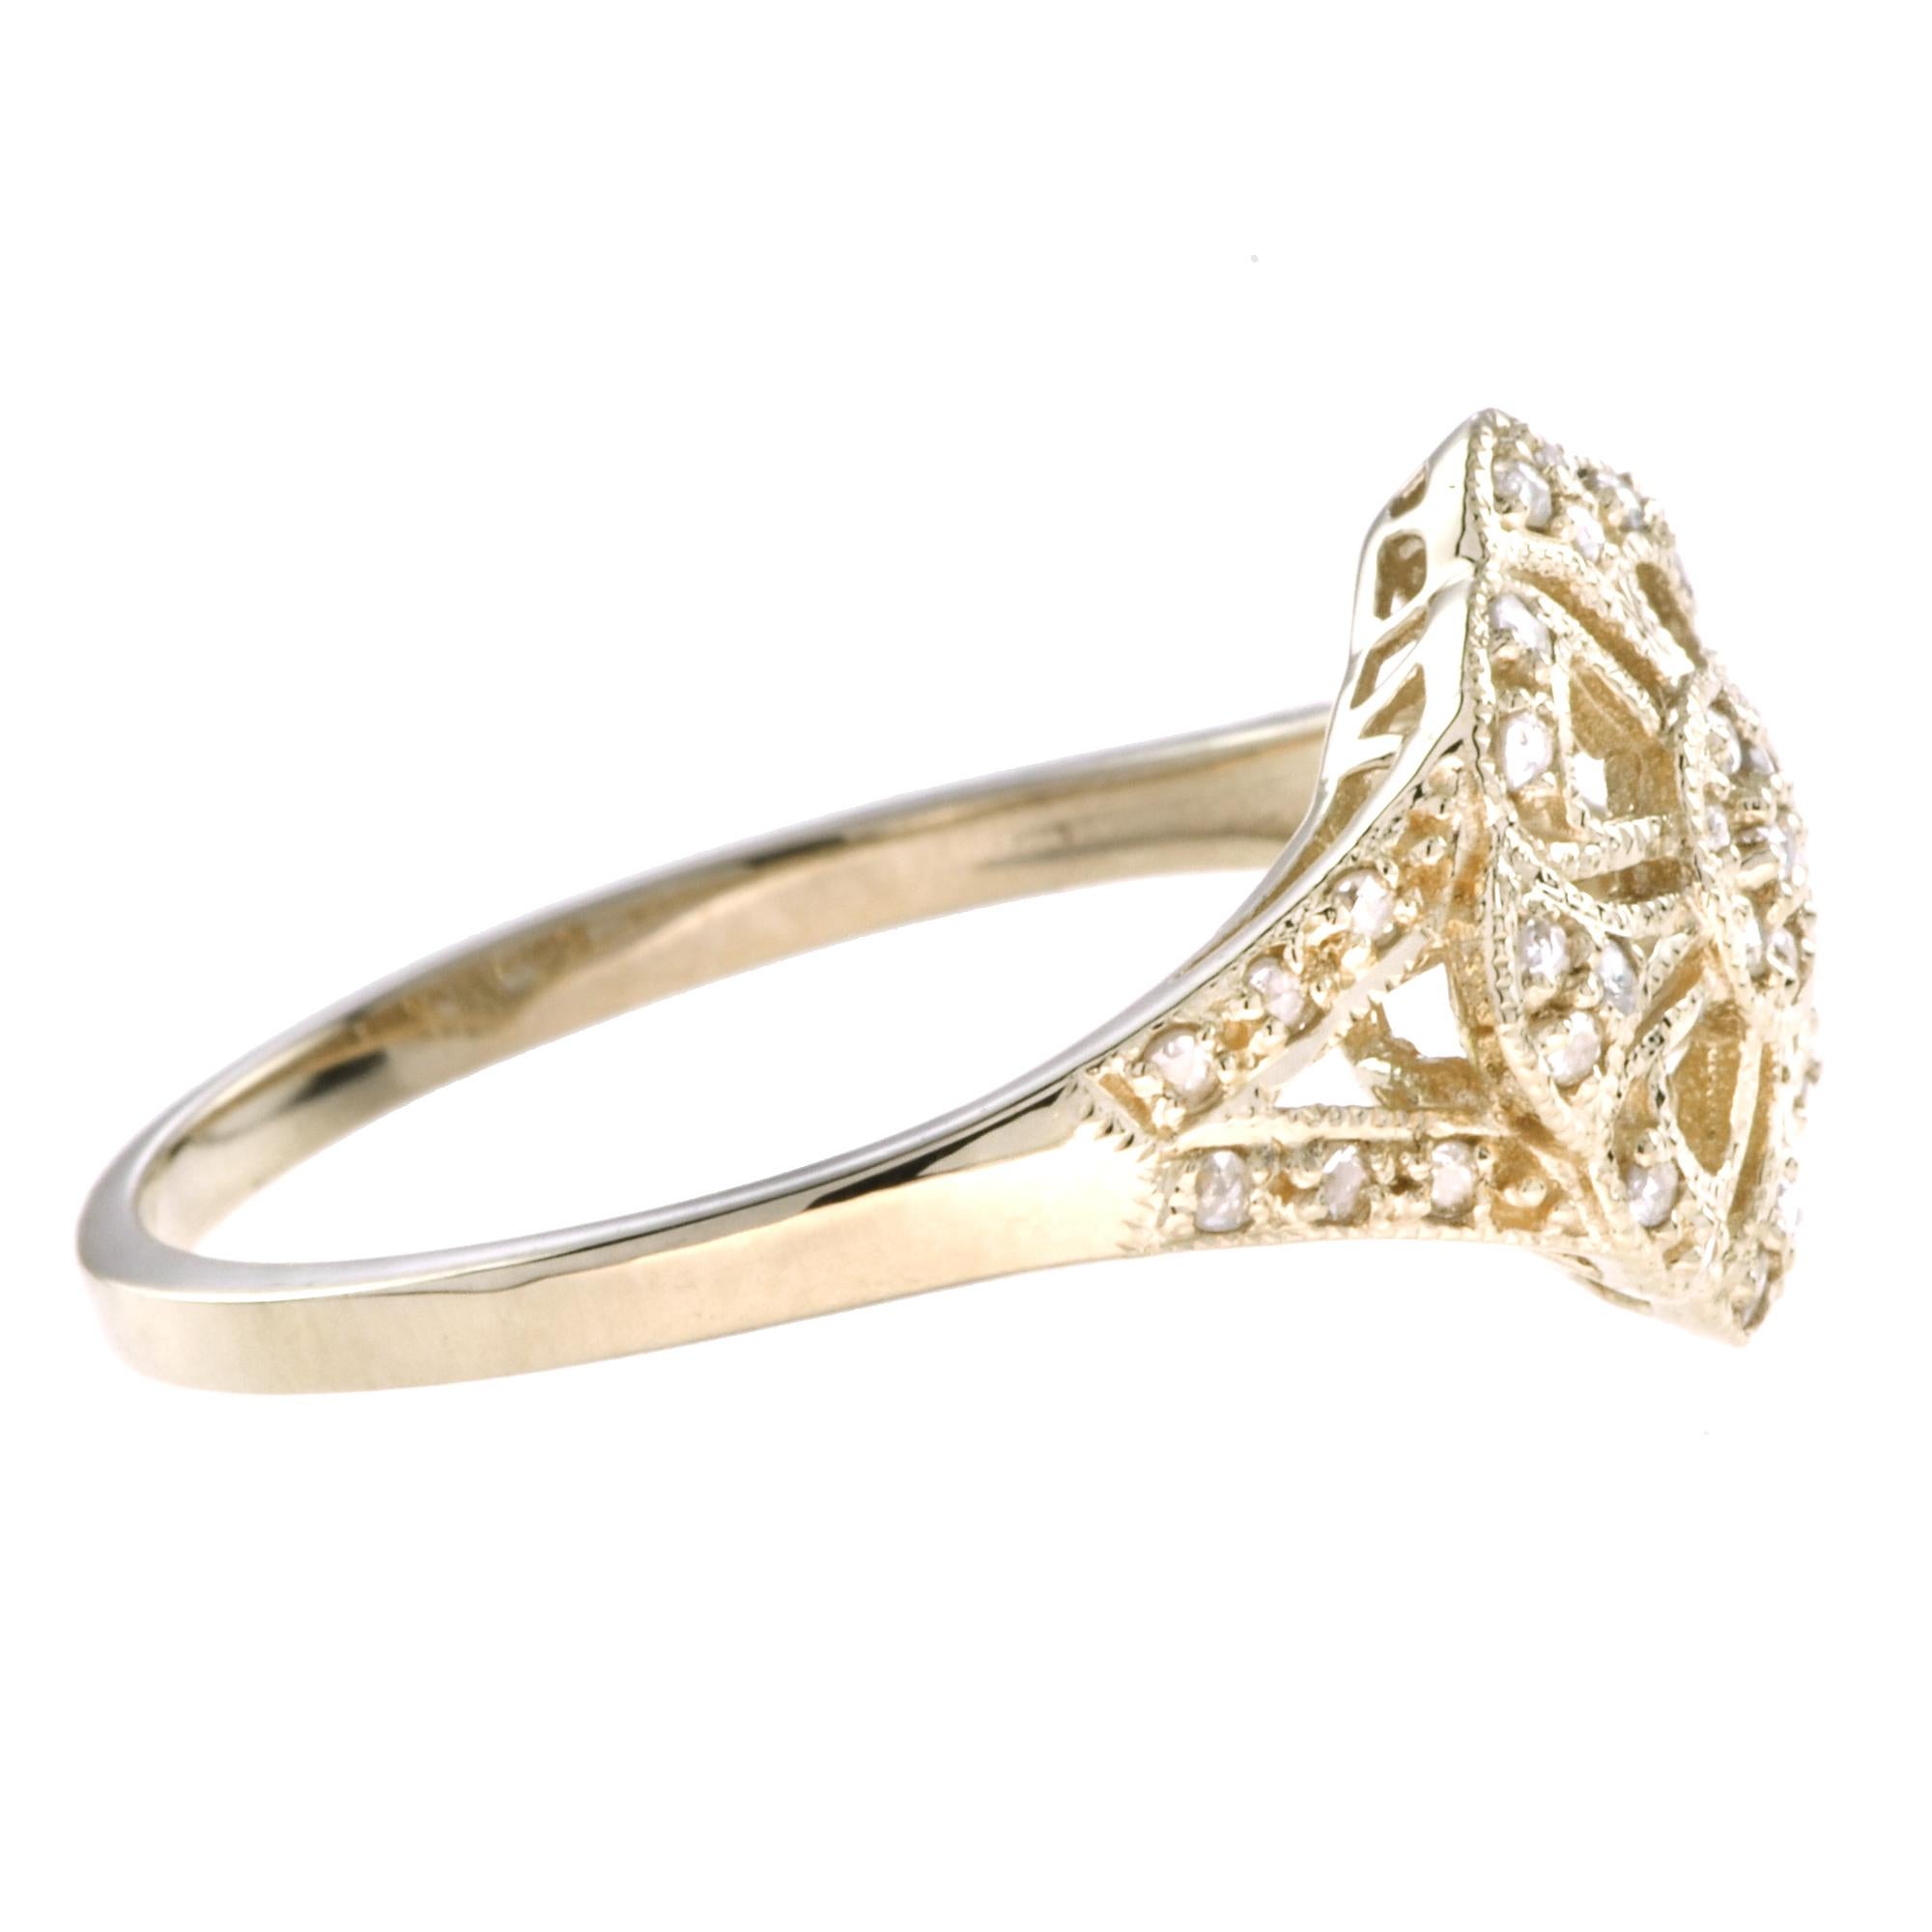 For Sale:  Vintage Style Diamond Flower Ring in 18K Yellow Gold 4